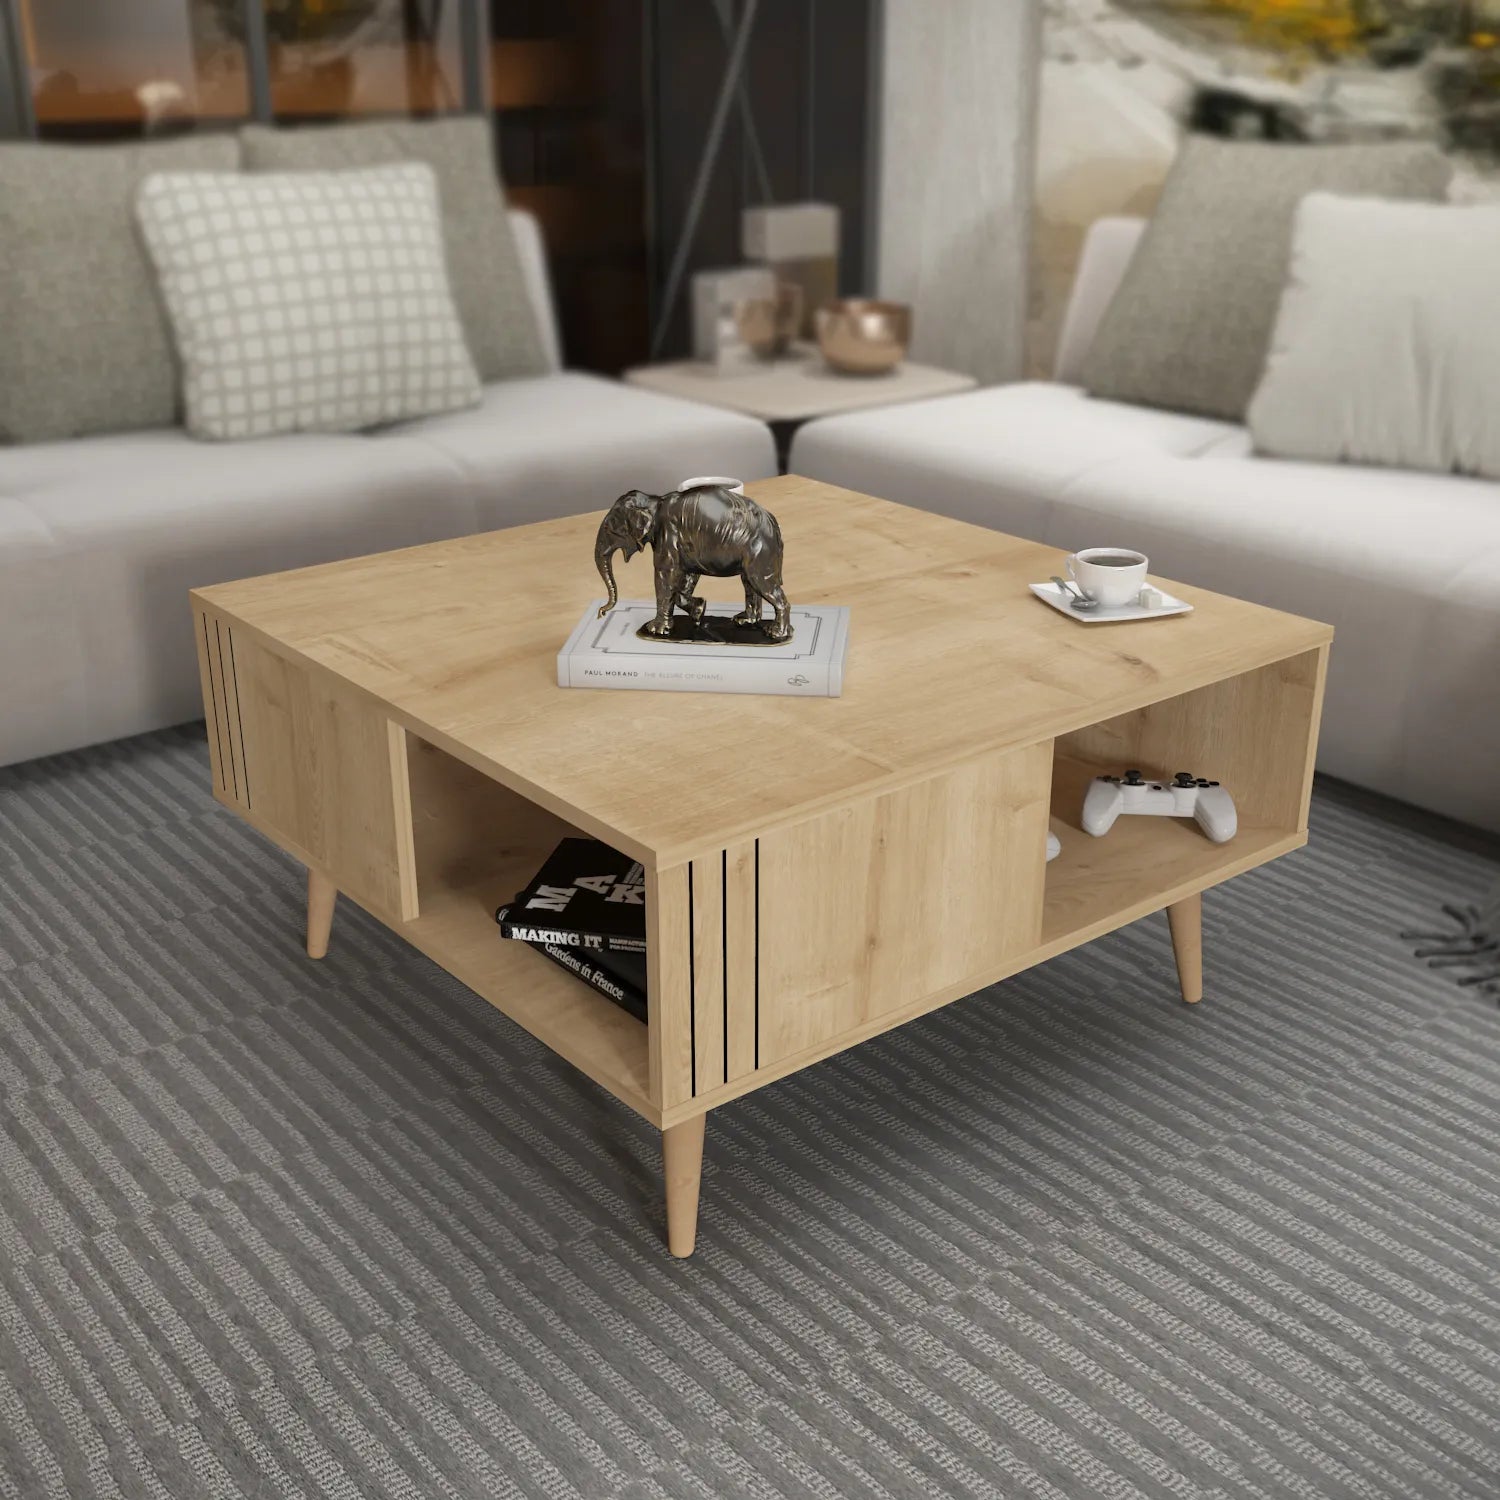 Ronas 35 inch Wide Square Coffee Table with Open Shelf Storage | Cocktail Table